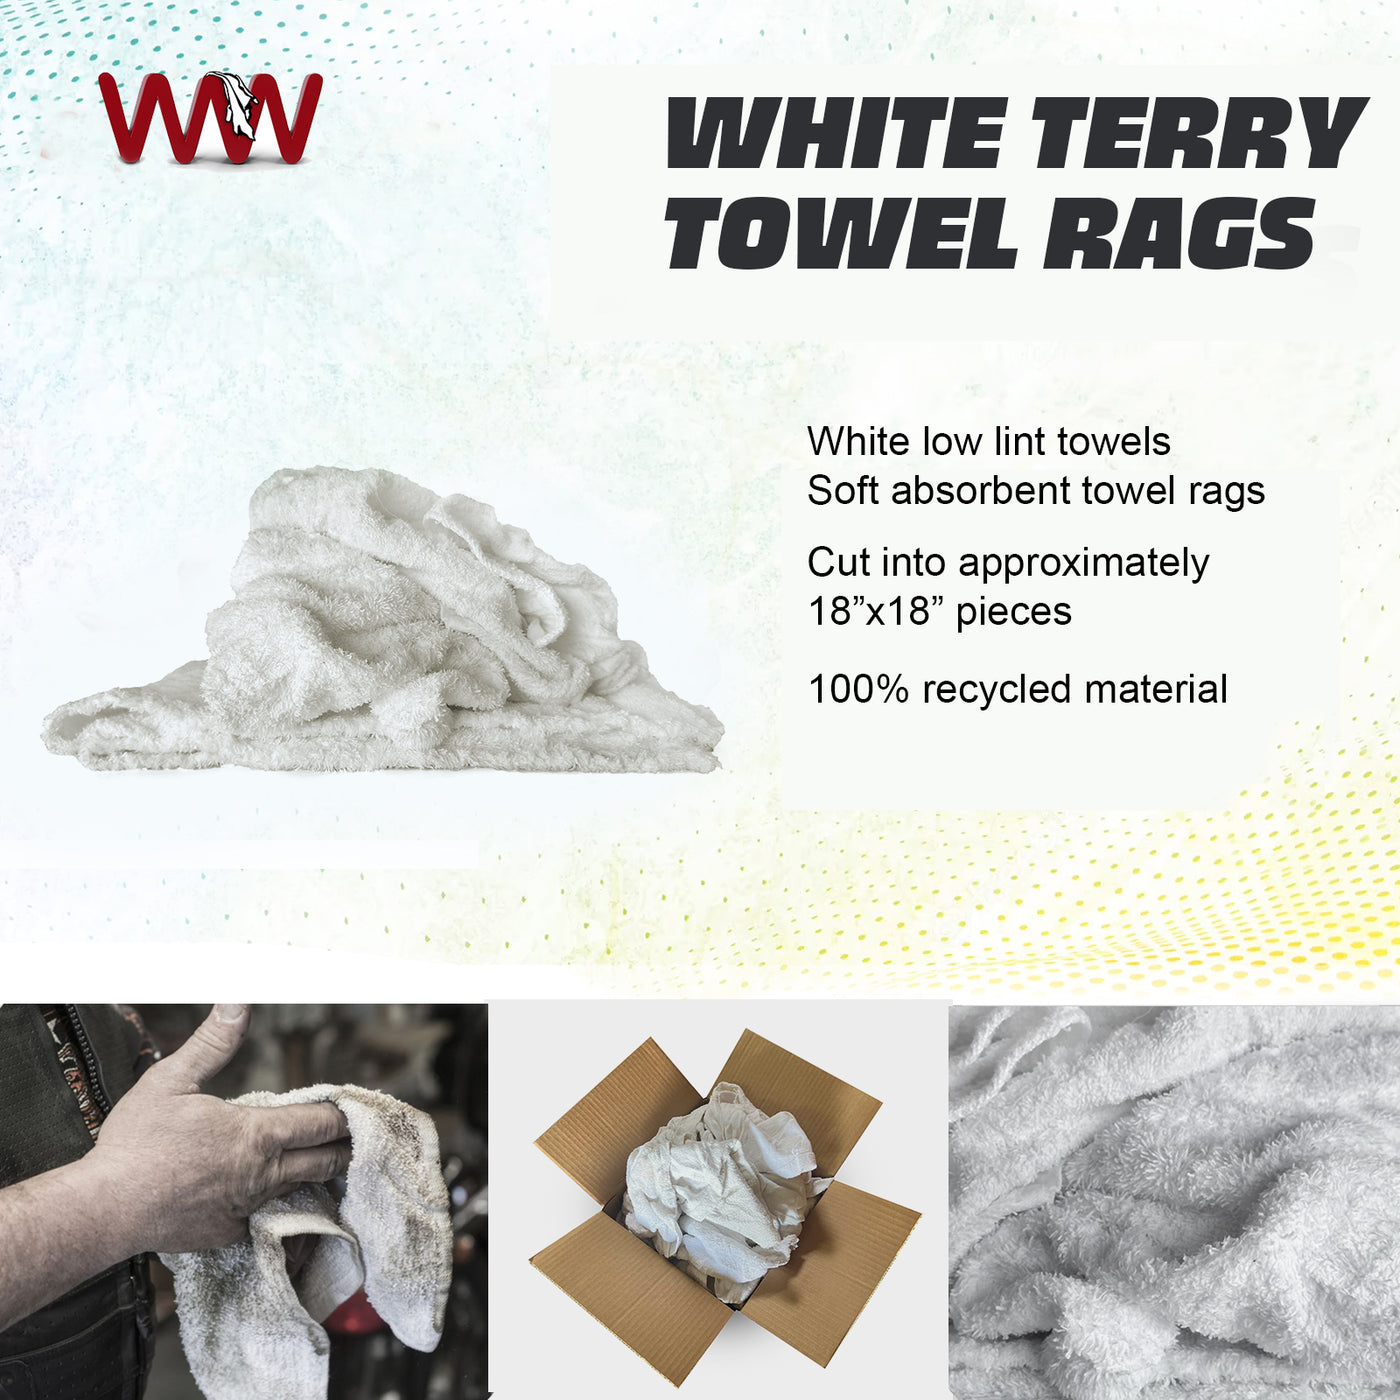 Affordable Wipers White Knit T-Shirt 100% Cotton Cleaning Rags 25 lbs. Bag - Multipurpose Cleaning